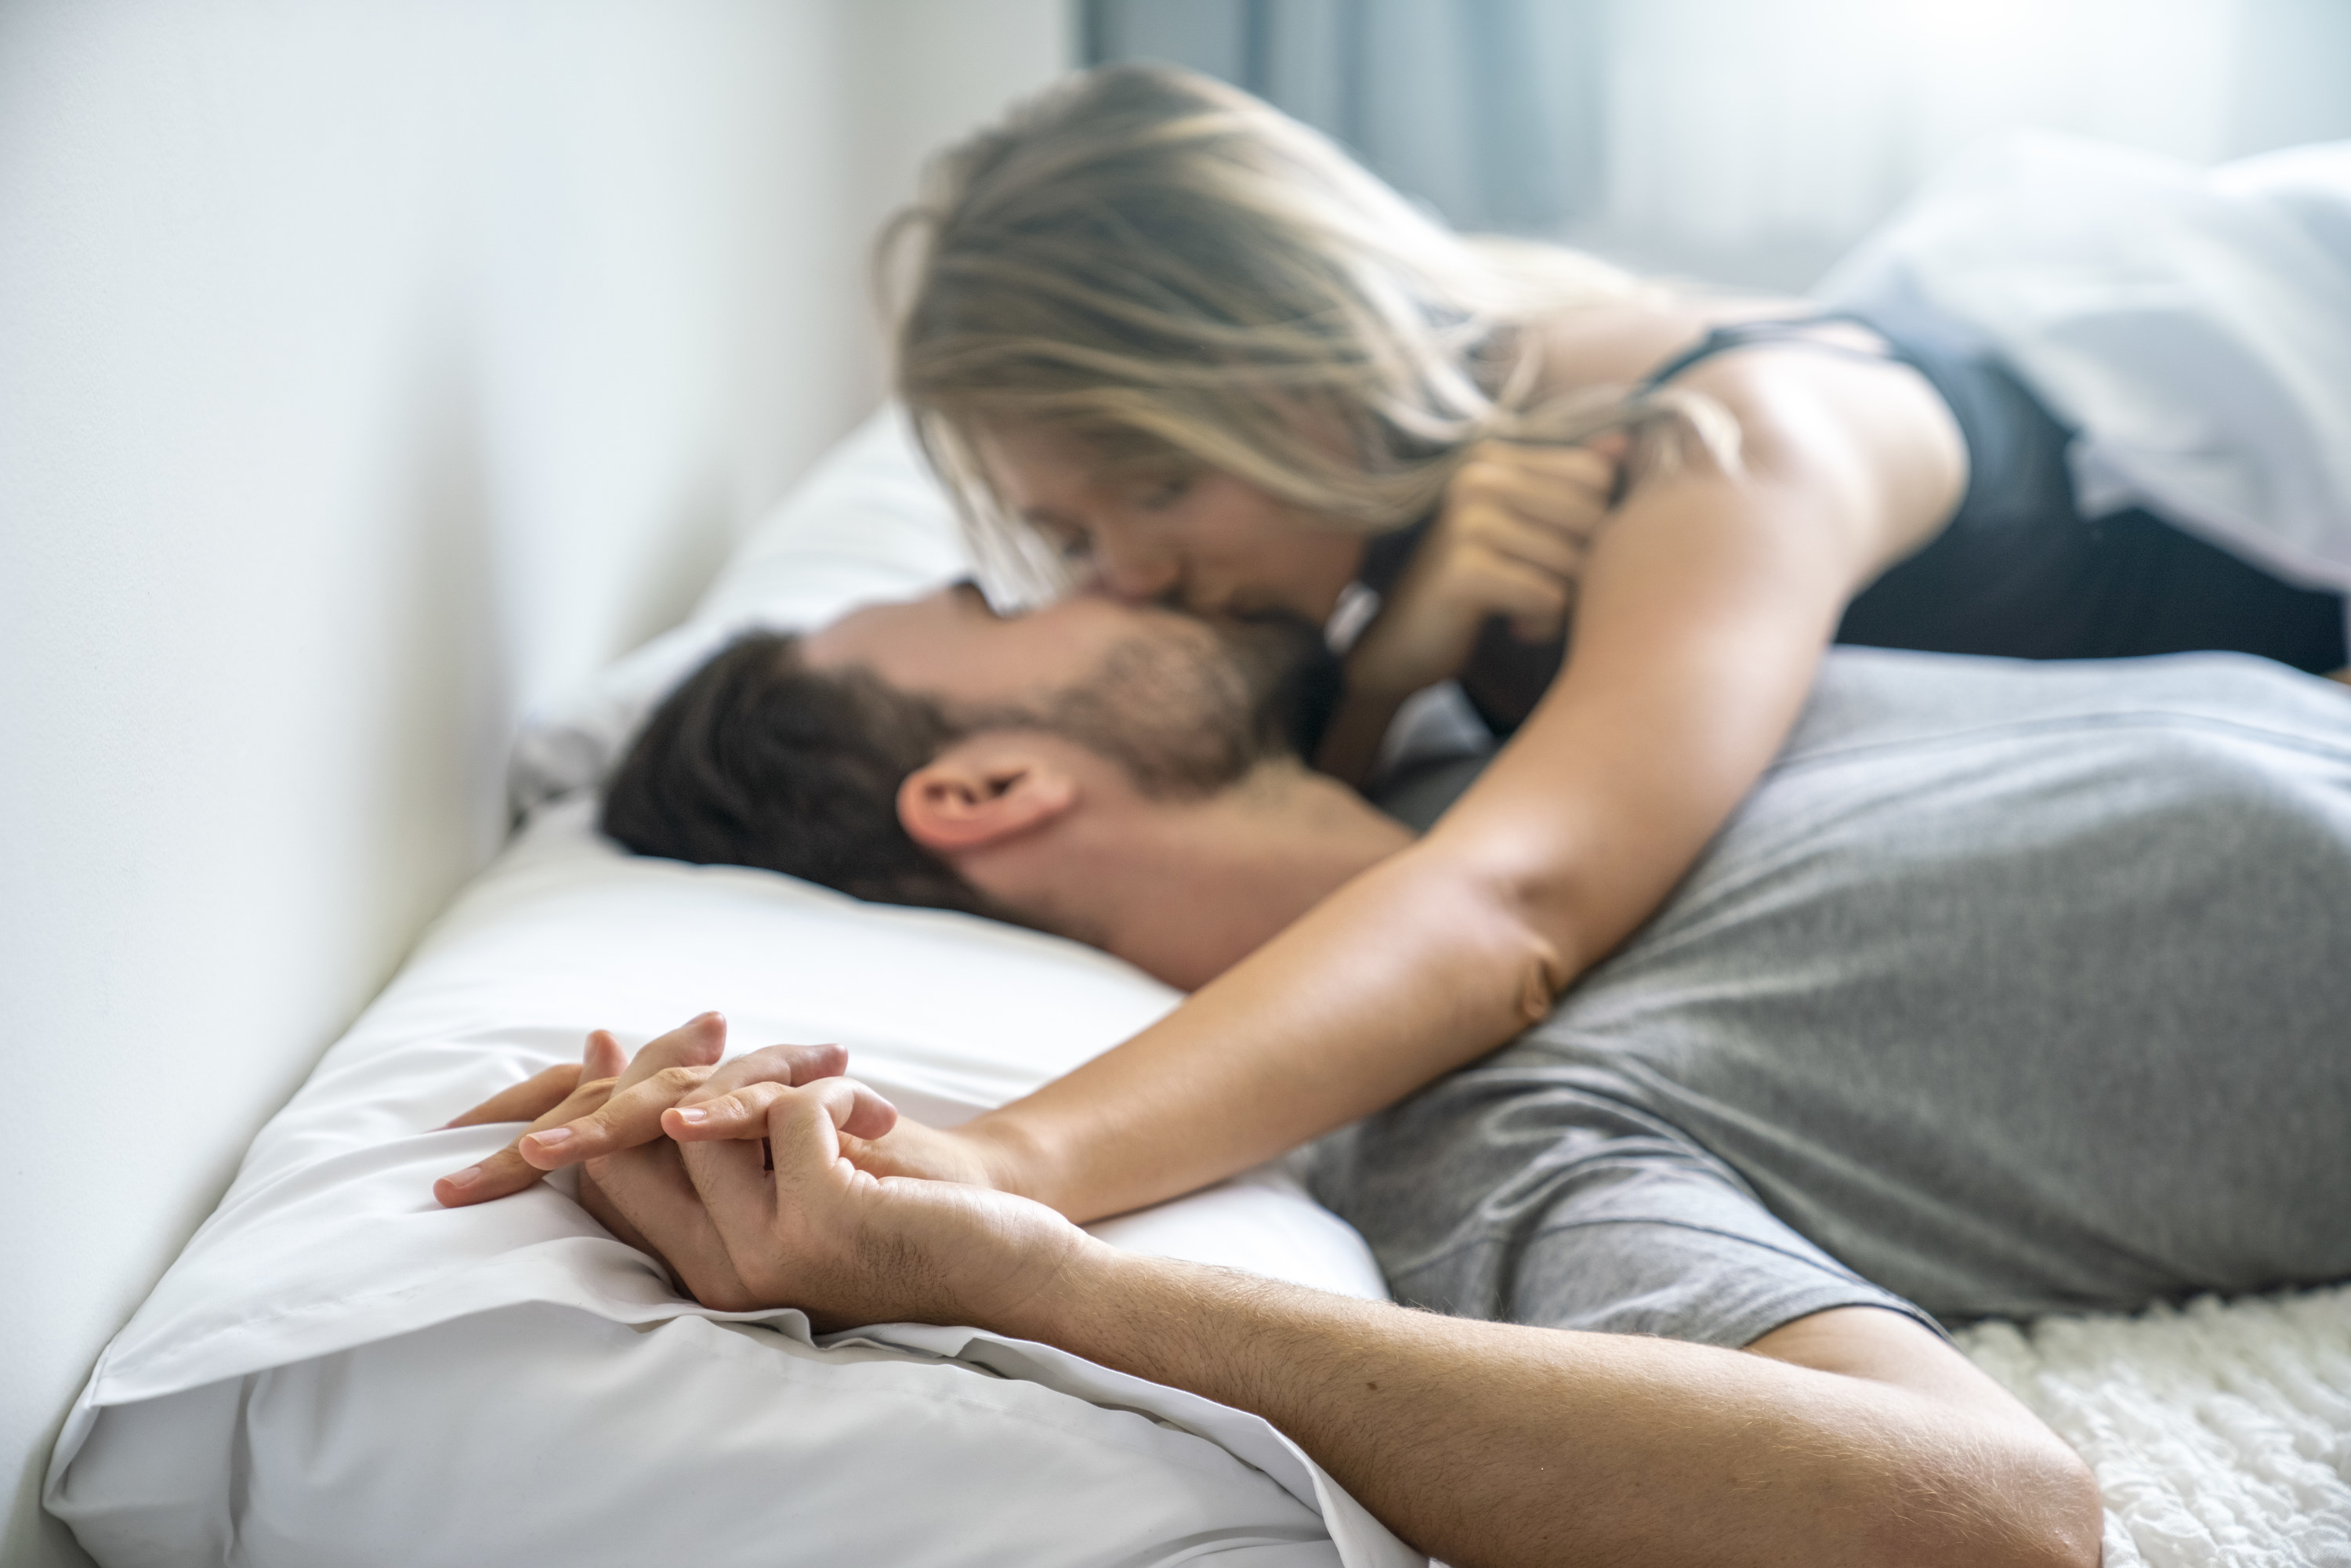 A man and a woman kissing in bed